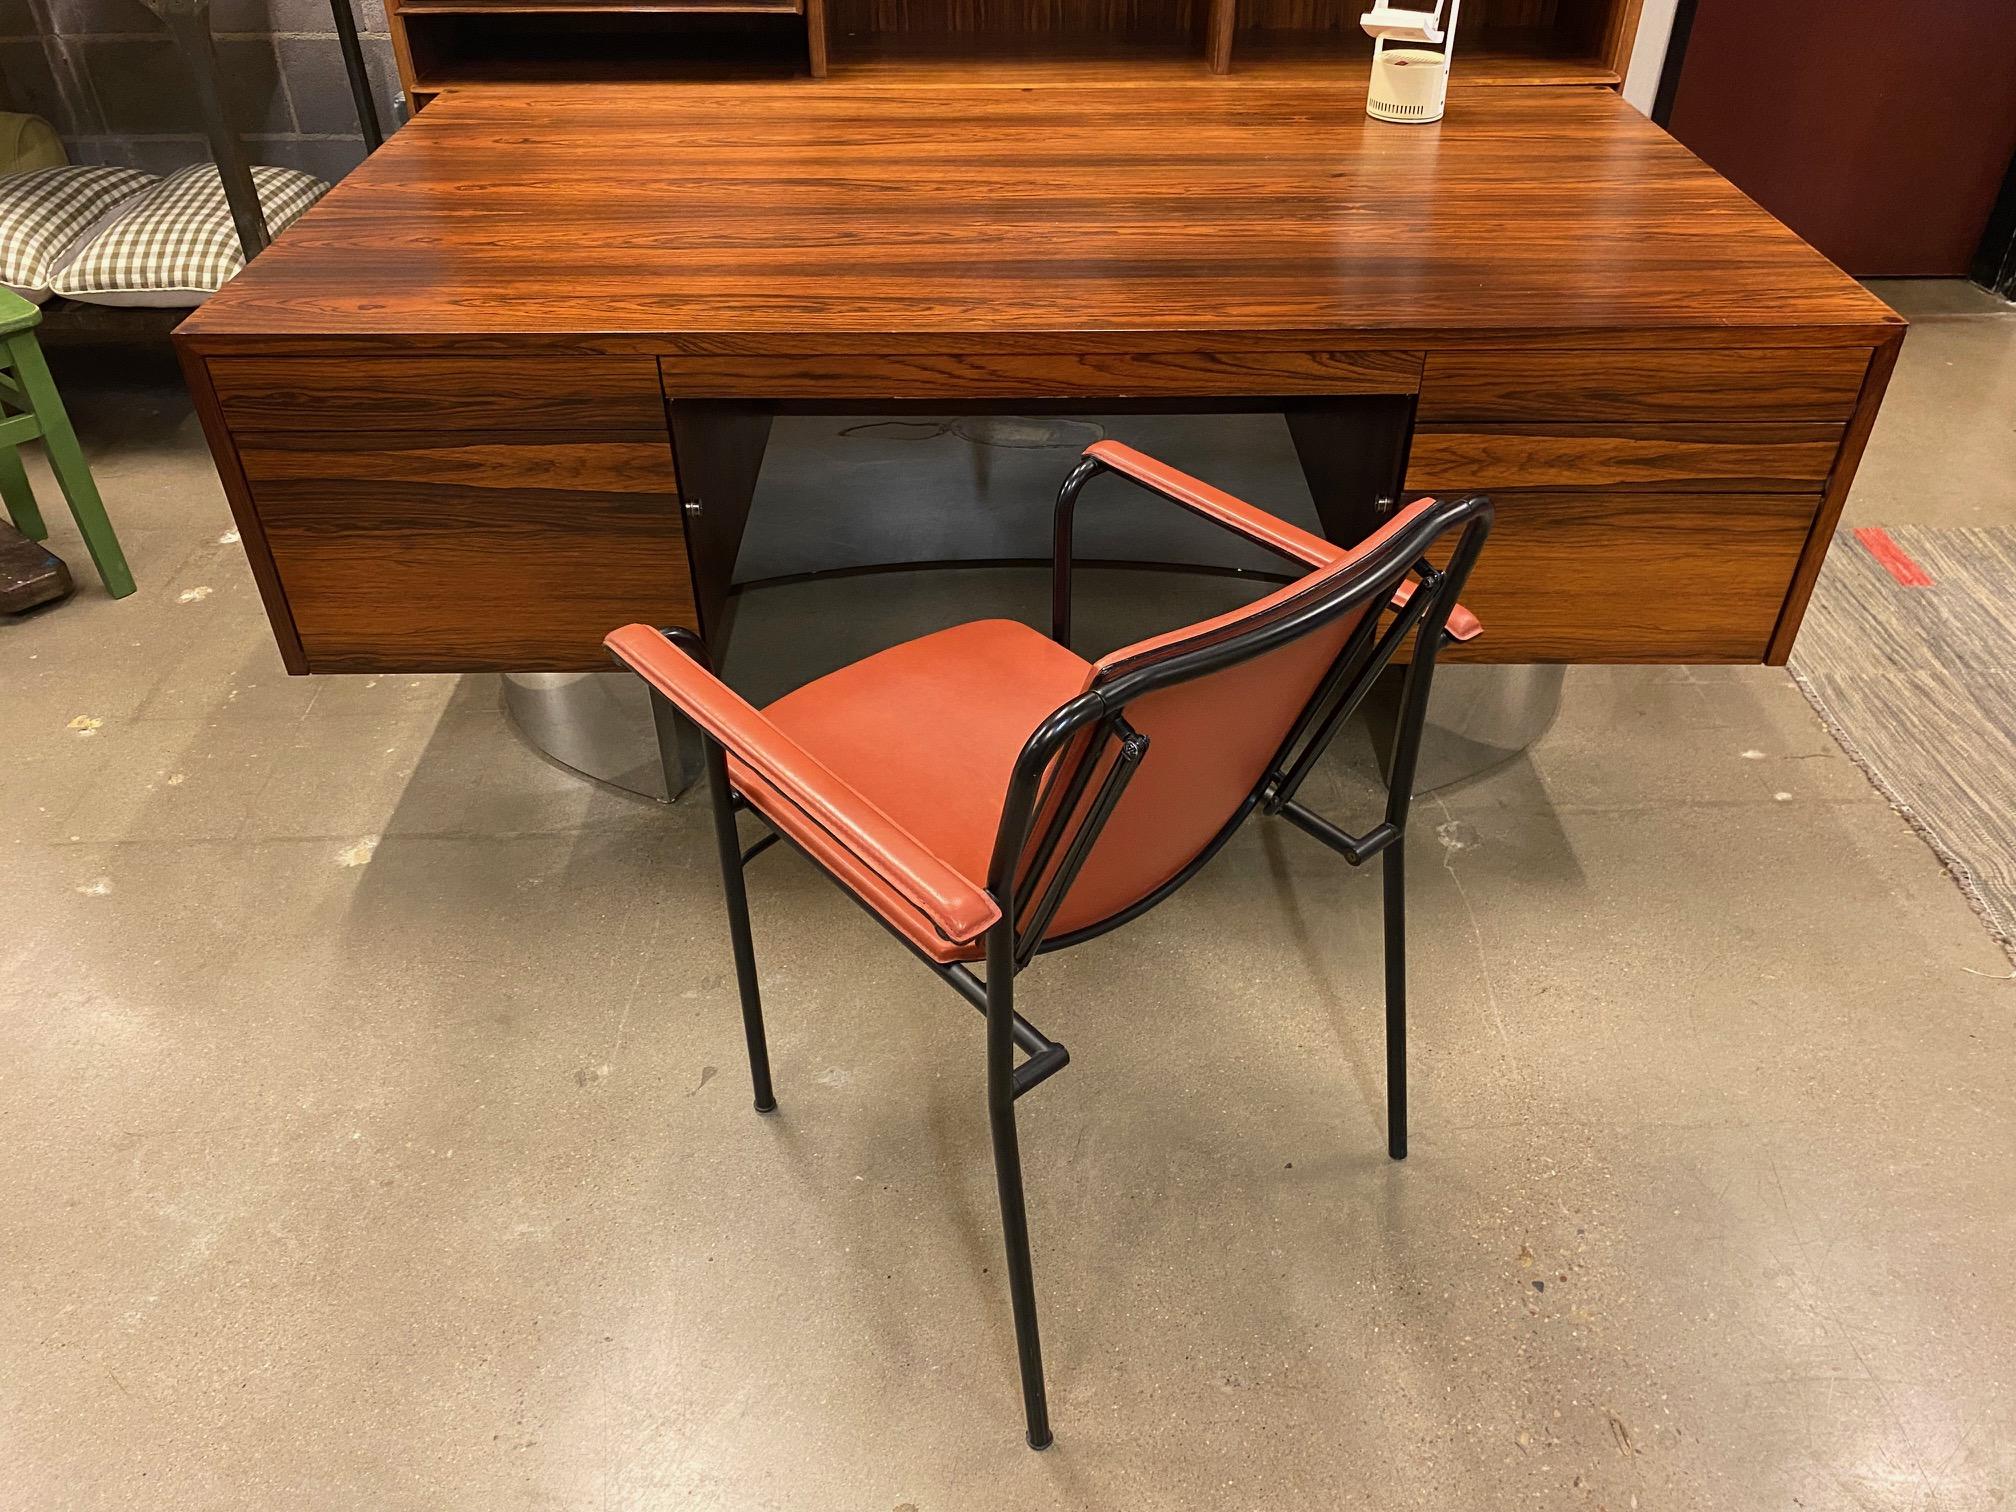 Mid-century rosewood veneer and stainless steel executive desk.  Six drawer kneehole desk is constructed of active grain Brazilian rosewood which rests on a mirror polished stainless steel crescent shape base.  Single full depth file drawer plus